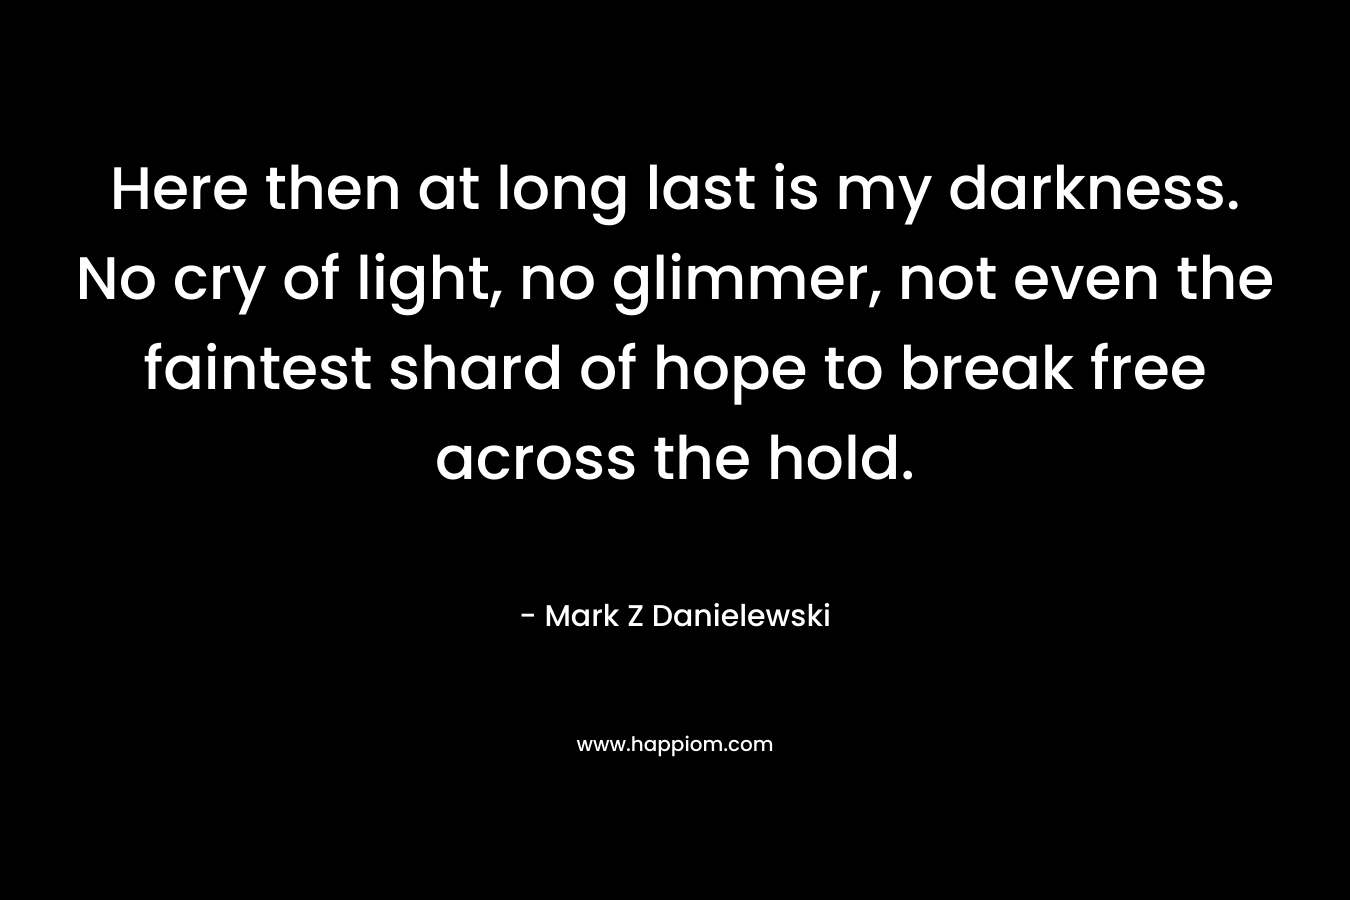 Here then at long last is my darkness. No cry of light, no glimmer, not even the faintest shard of hope to break free across the hold. – Mark Z Danielewski